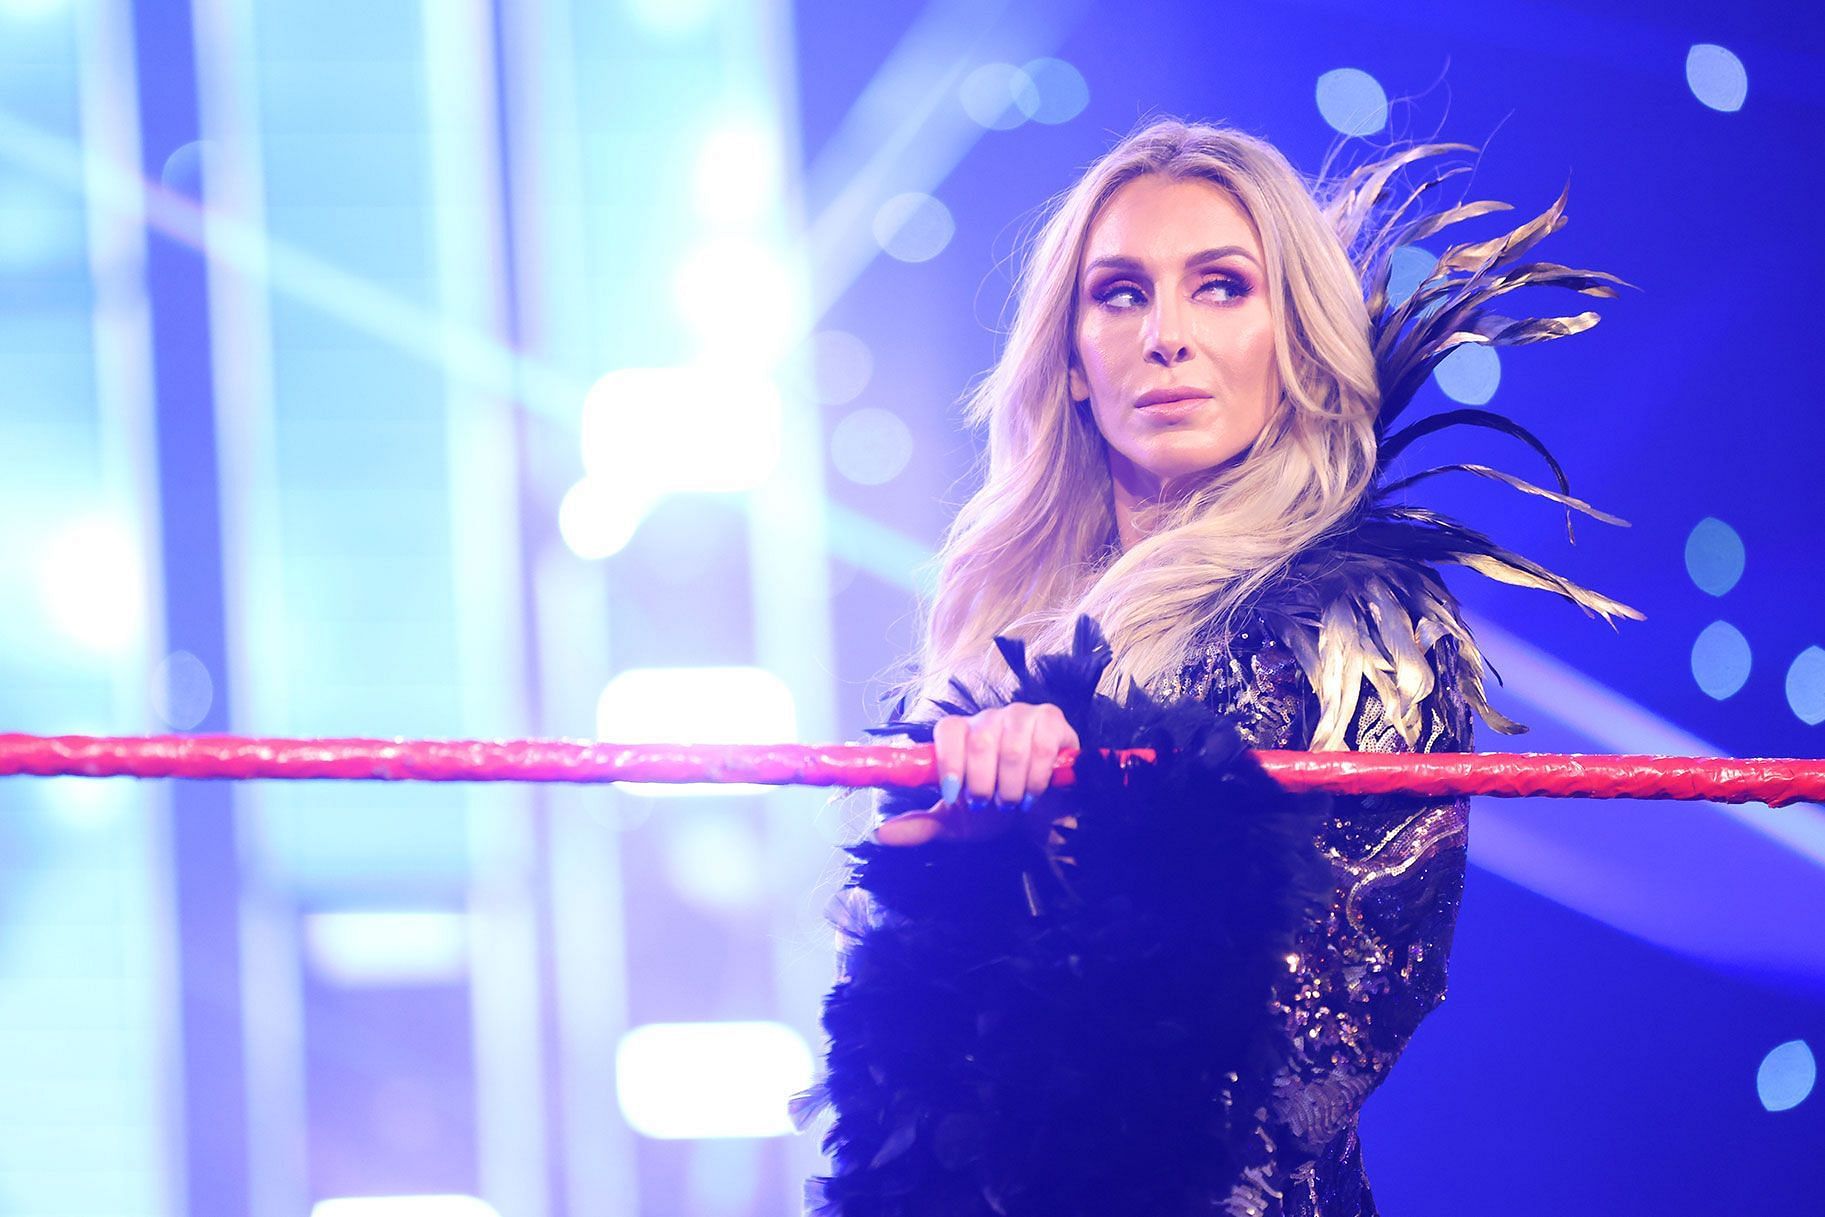 The Queen of professional wrestling, Charlotte